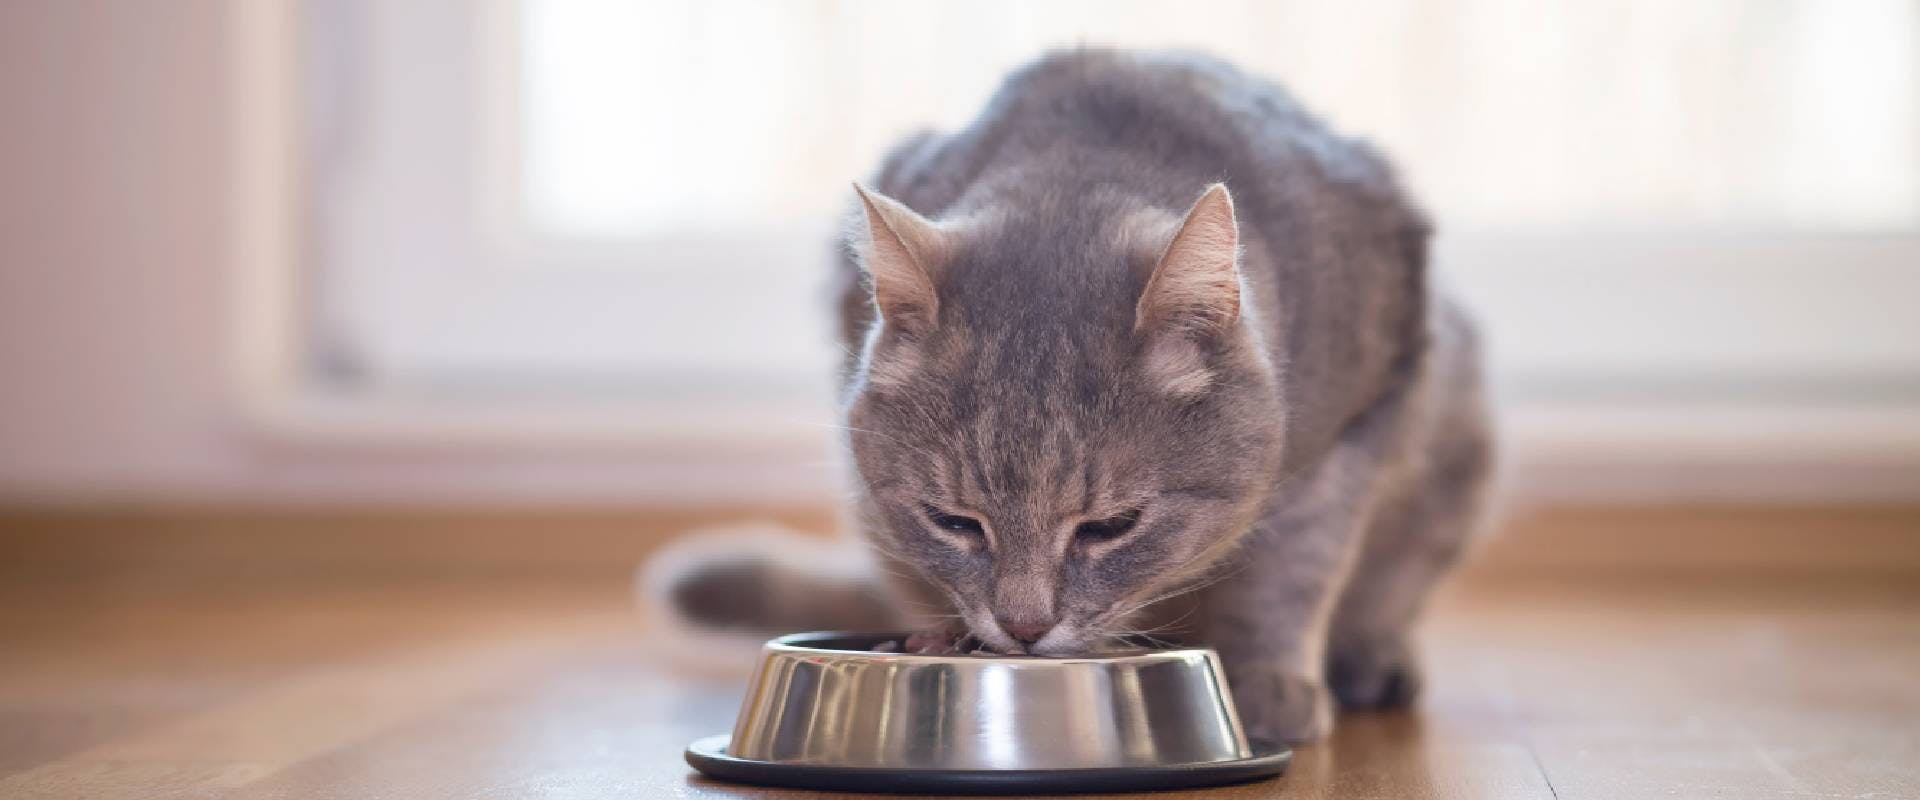 Grey cat eating from a metal bowl